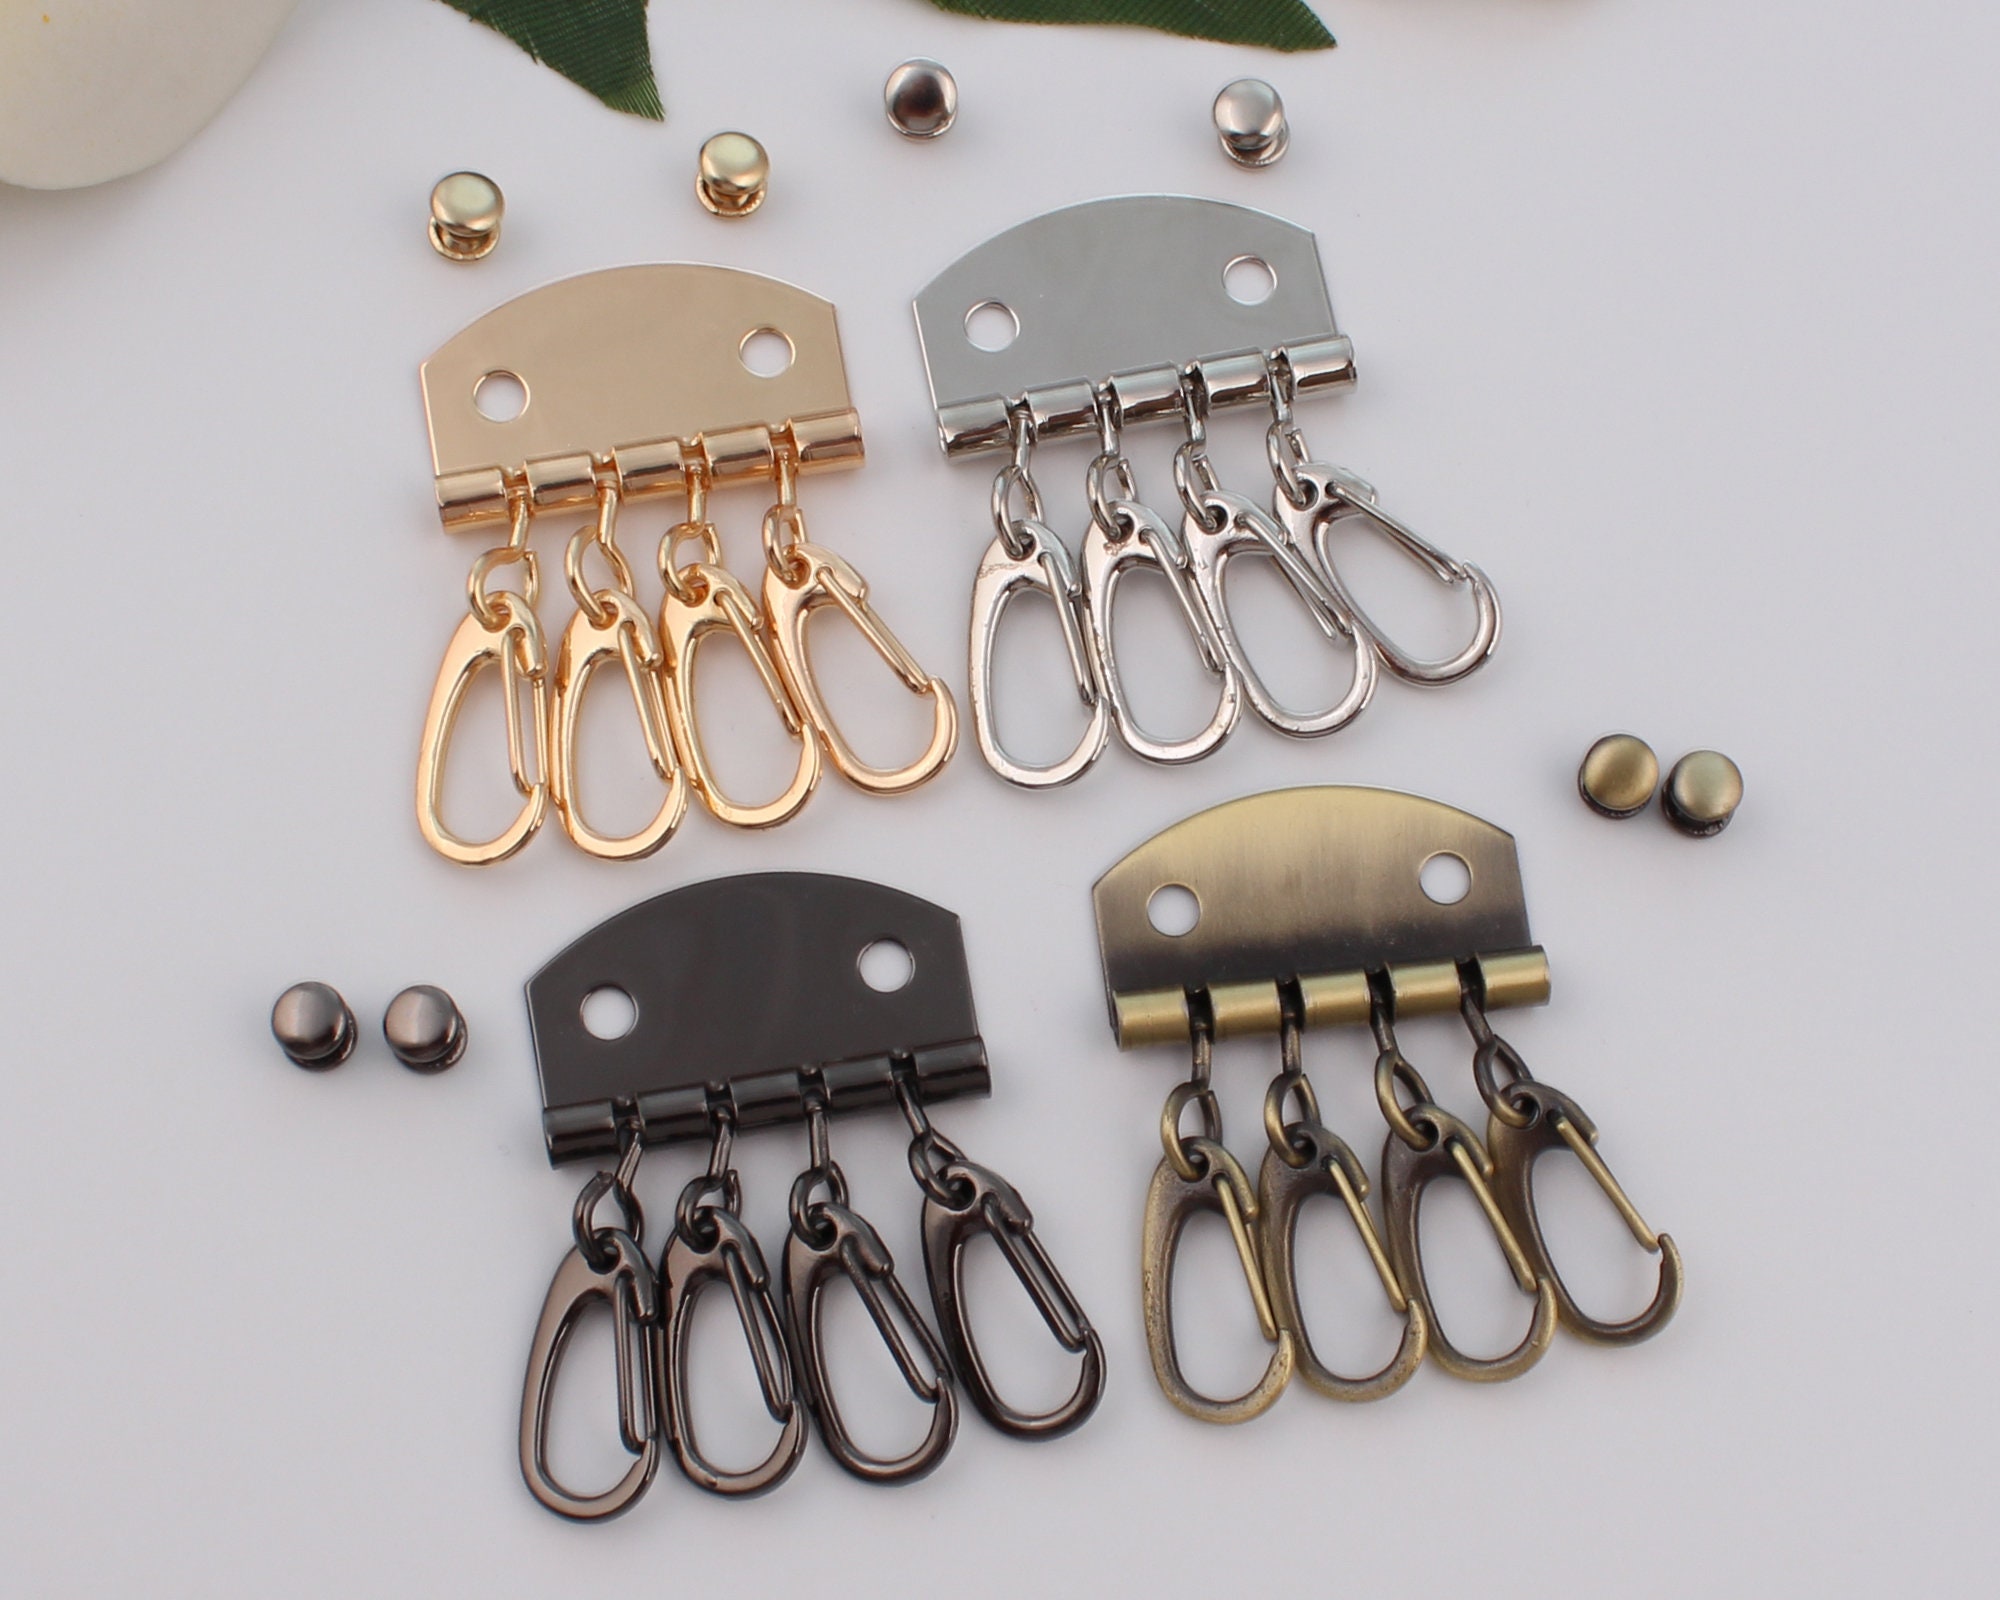 JEWEDECO 20pcs Back Clip Metal Accessories Metal Key Fob Clamps Keychain  Hardware Pliers Keychain Fob Hardware Key Ring Hardware Key Accessories Key